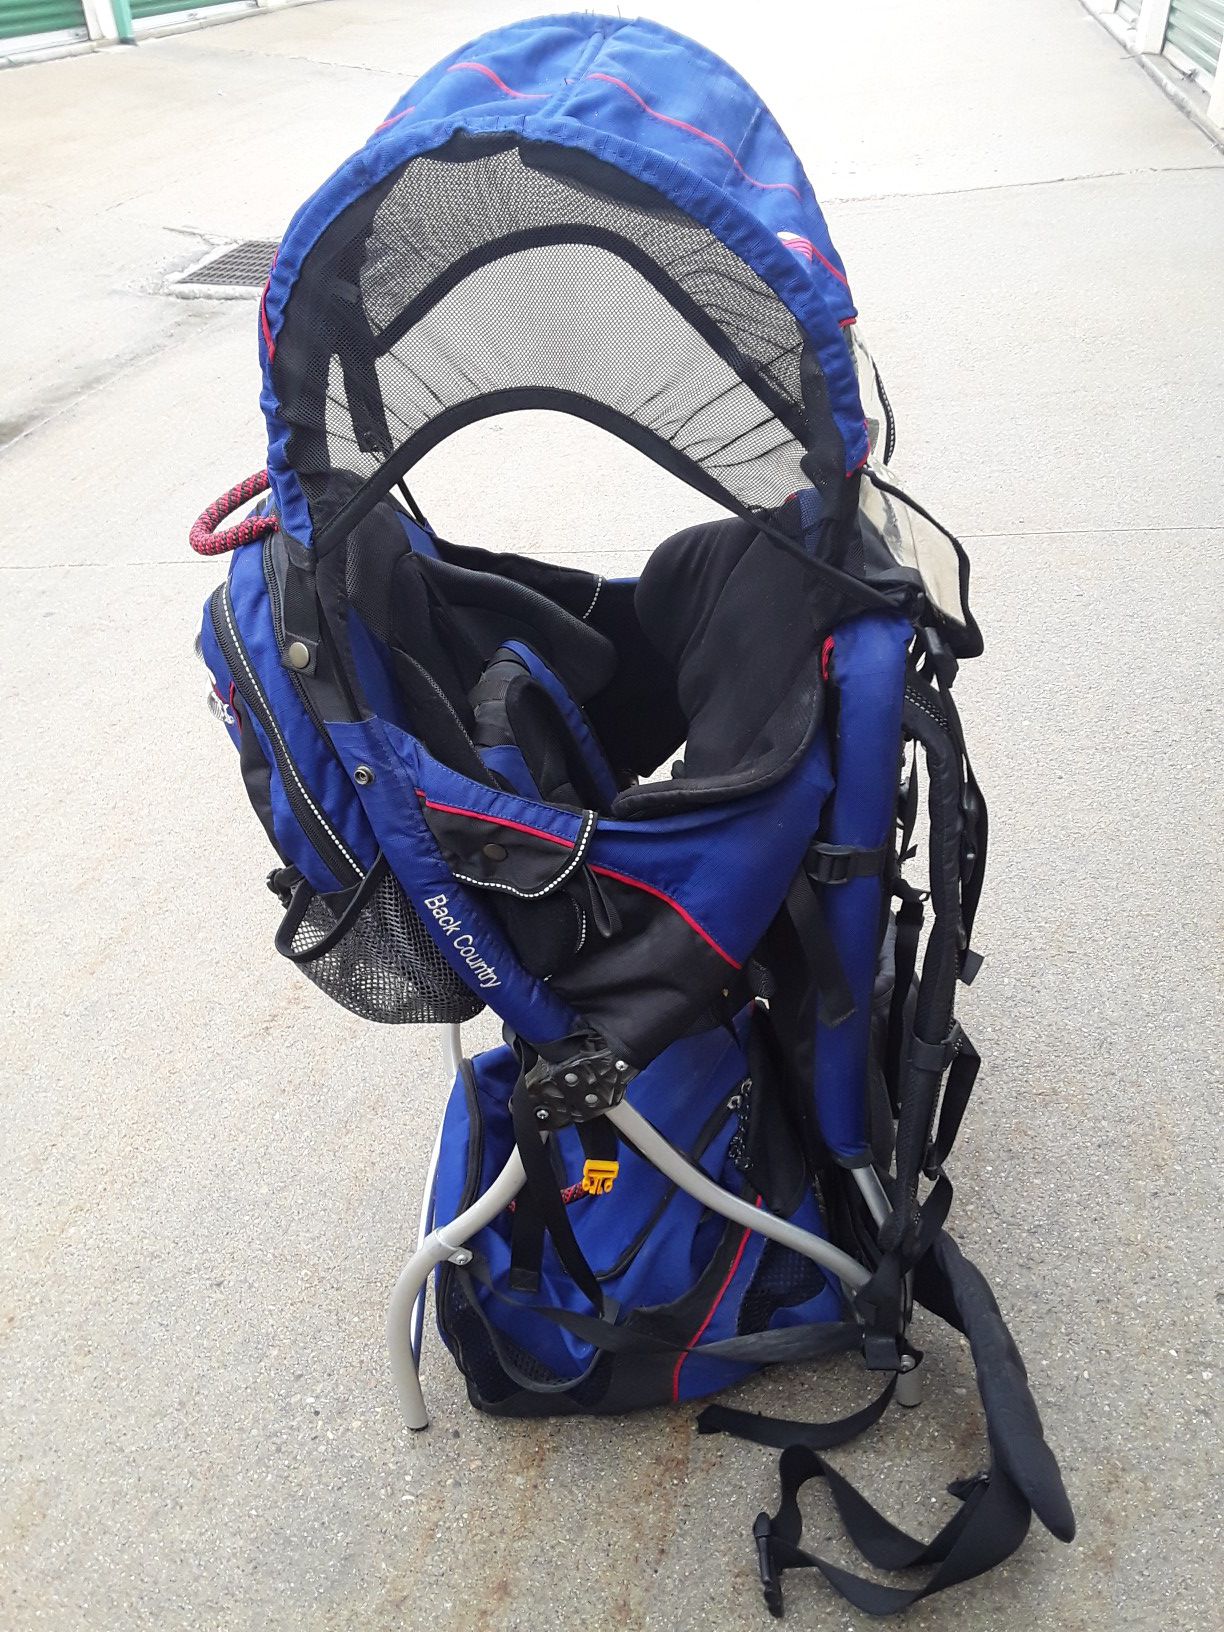 Kelty back country backpack baby carrier